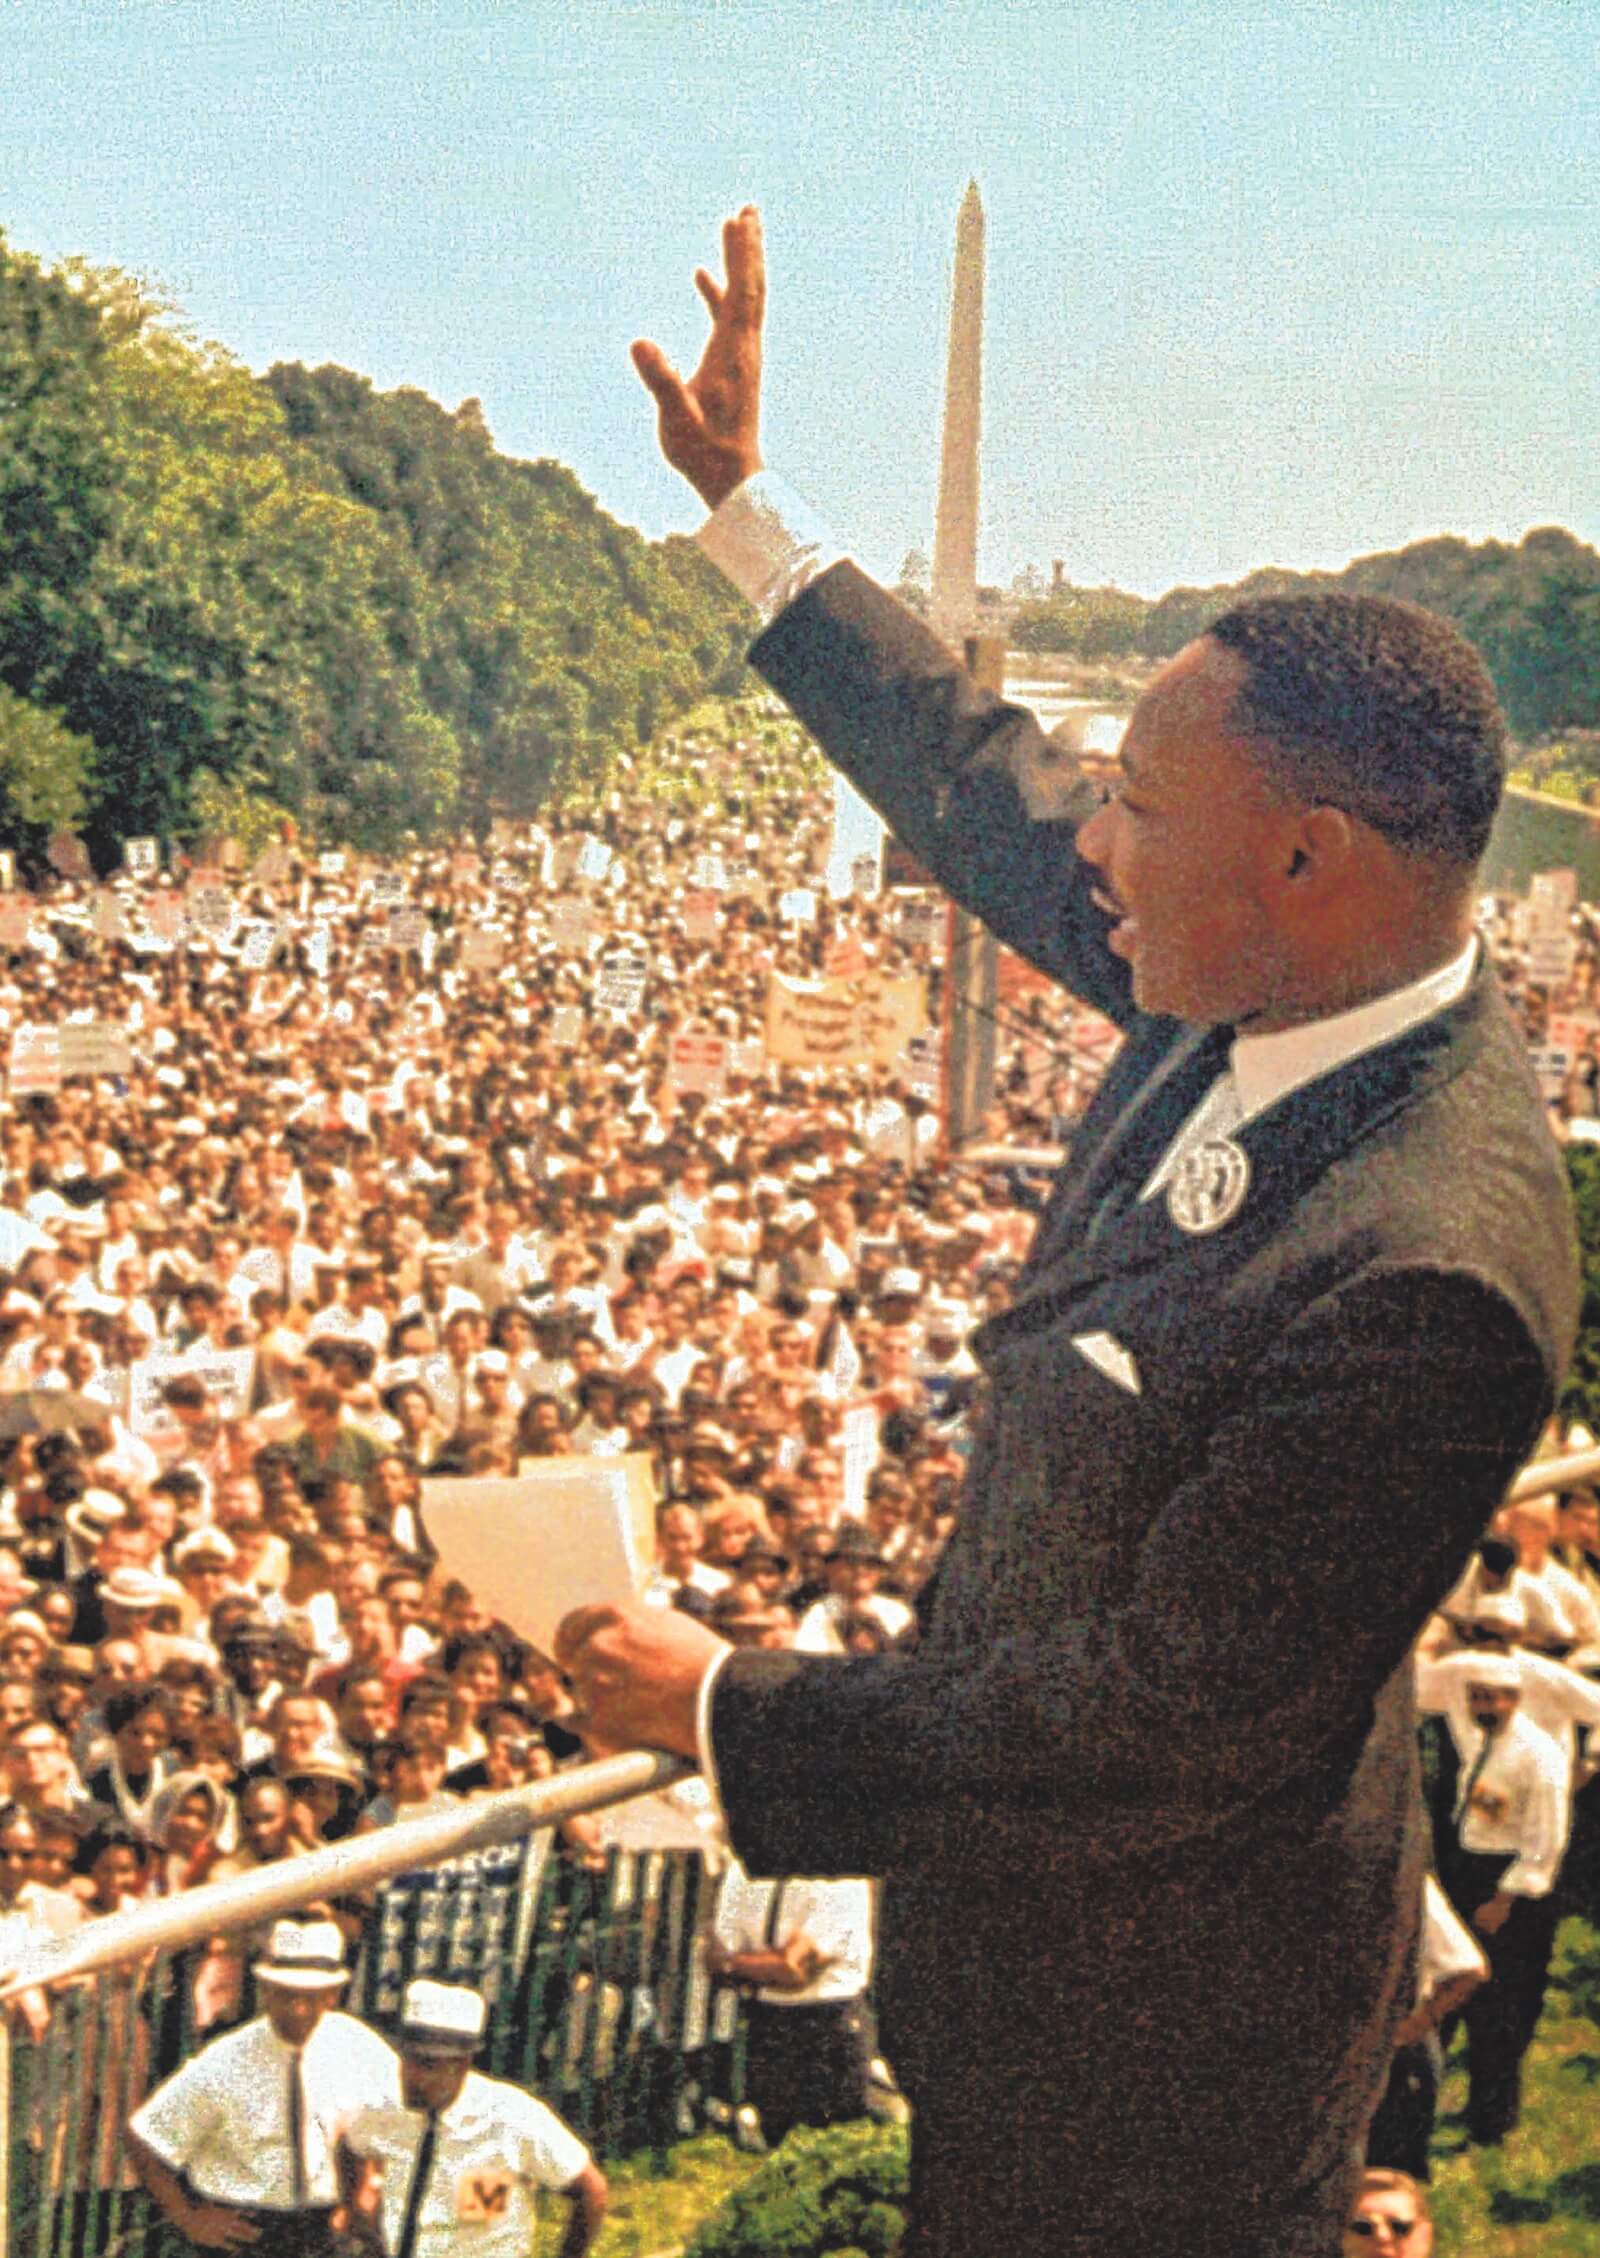 Queens will celebrate the legacy of Dr. Martin Luther King Jr. with a series of events.